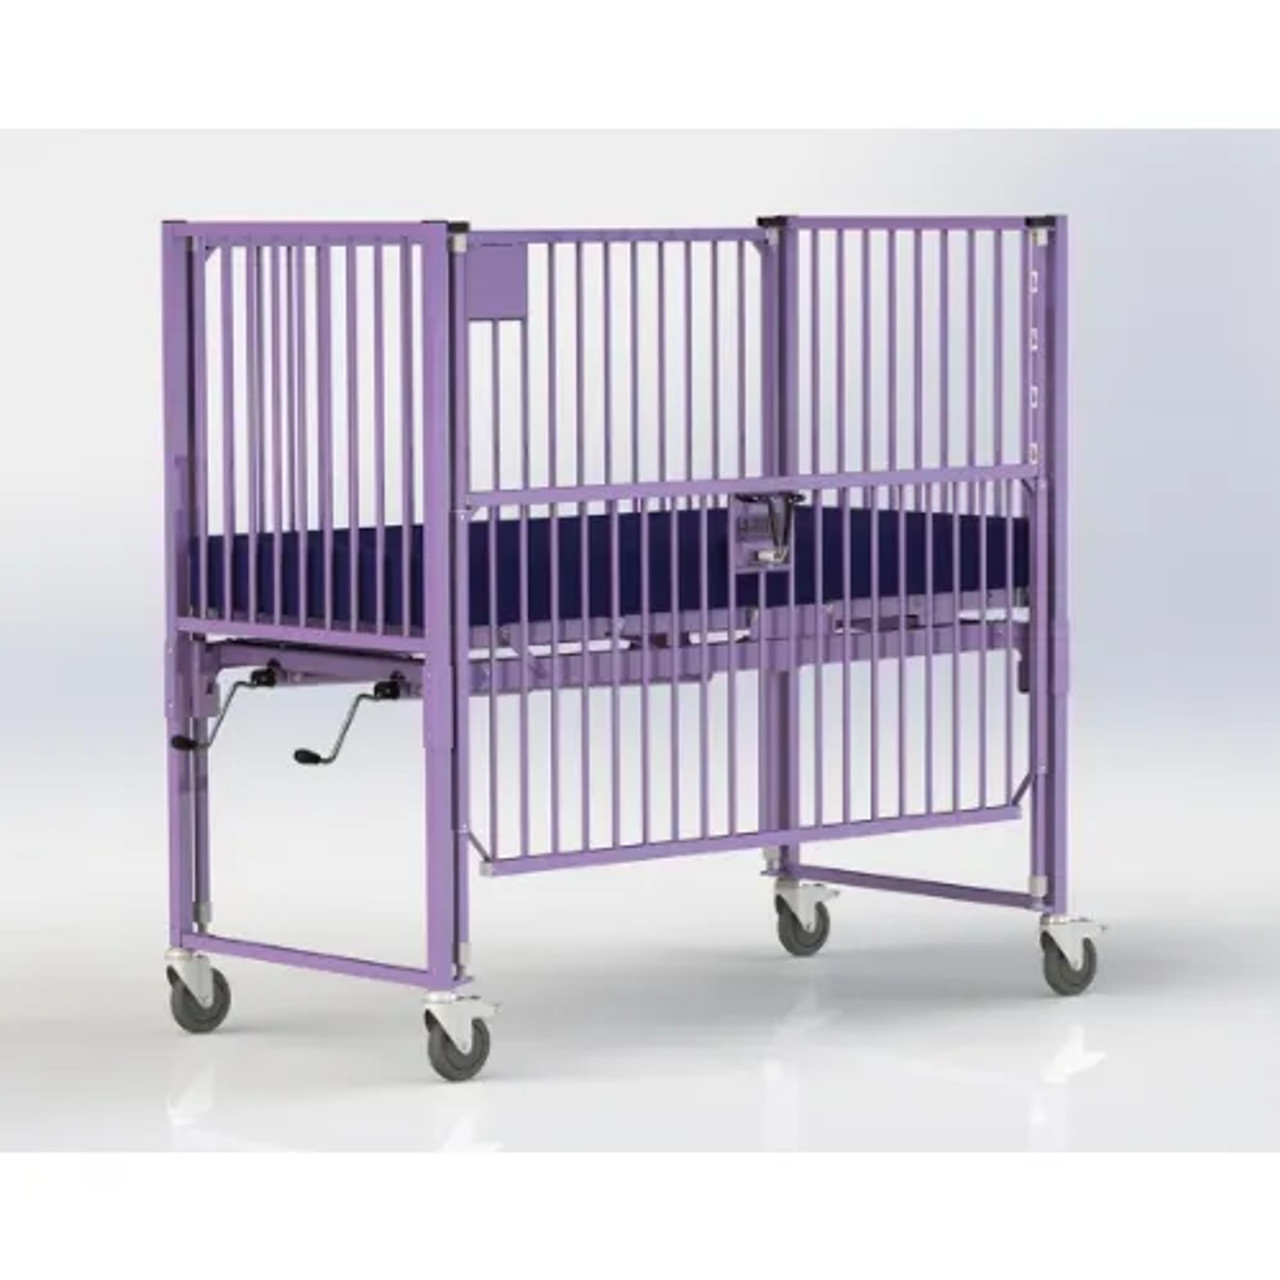 HARD Manufacturing Hospital Crib for Homecare - Spacious | 83"L x 36"W"-Chicken Pieces